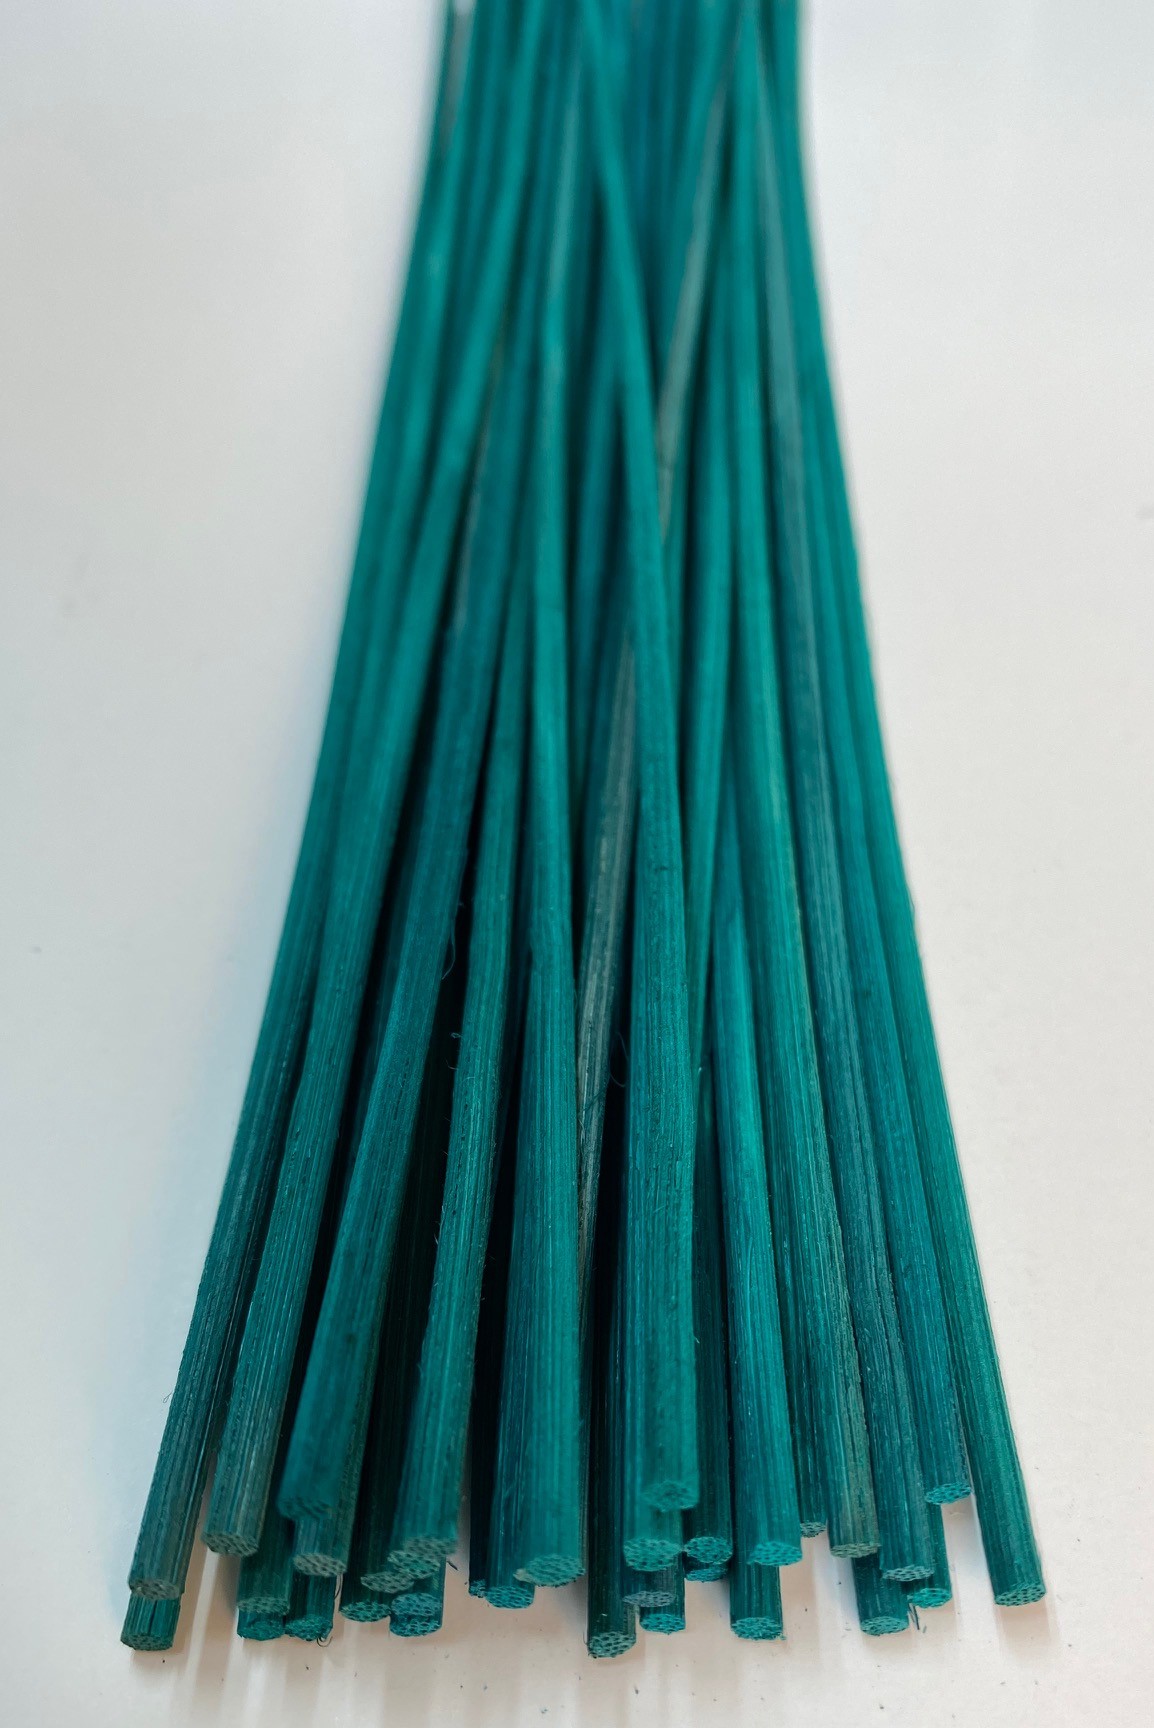 36 Pack of Green Reed Diffuser Reeds